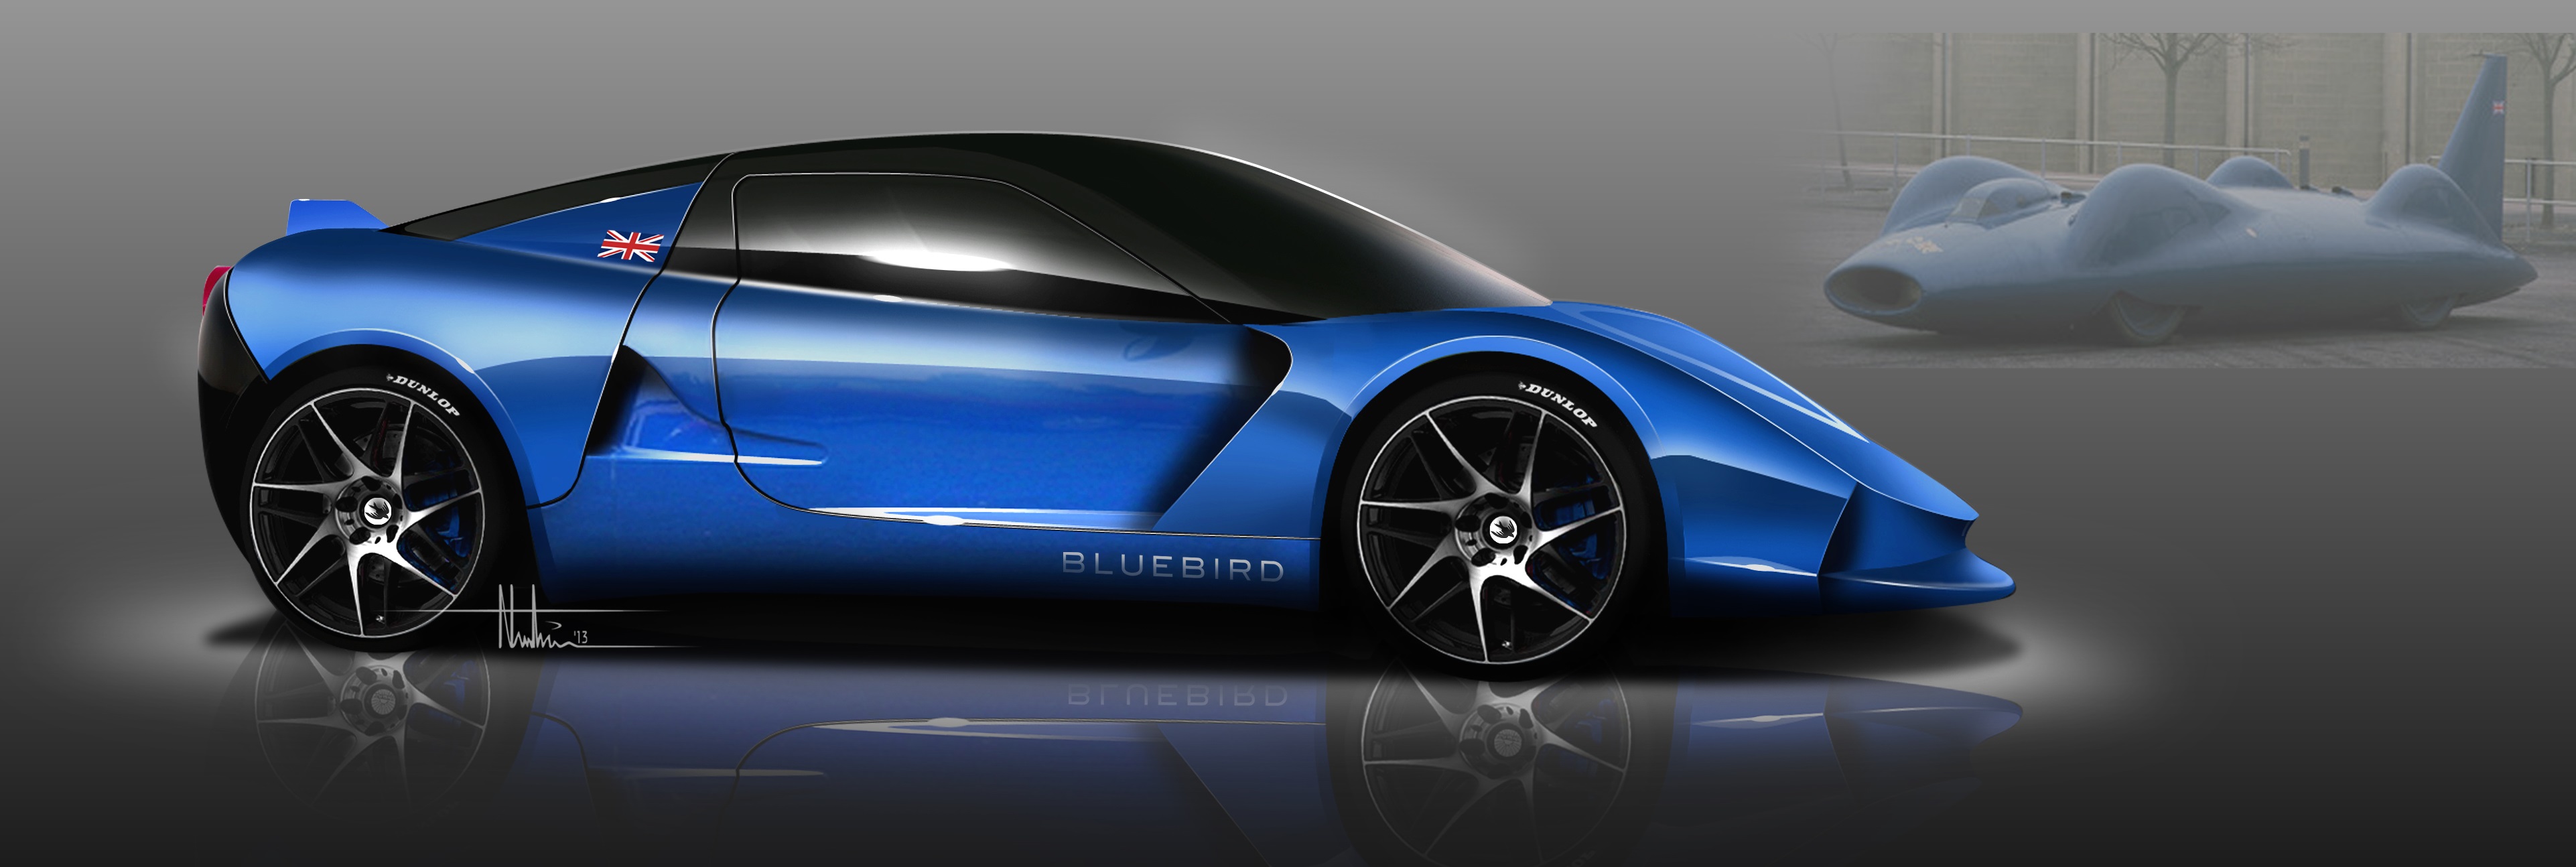 Official Bluebird DC50 Electric Sports Car and Race Car